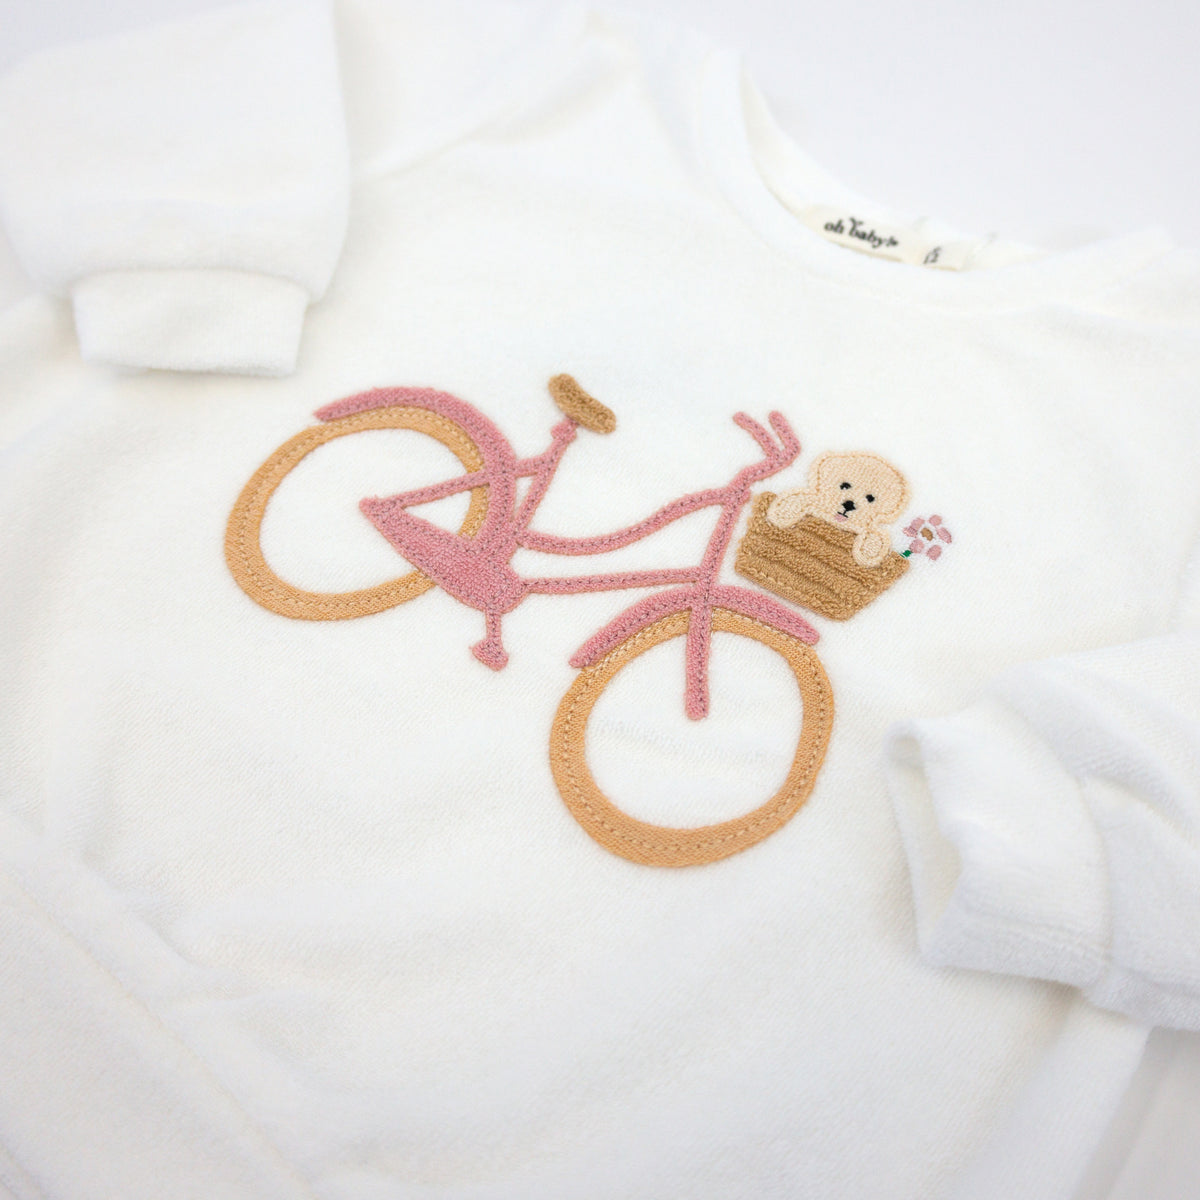 oh baby! Cotton Terry Boxy Sweatshirt - Bicycle Puppy Basket Applique - Snow